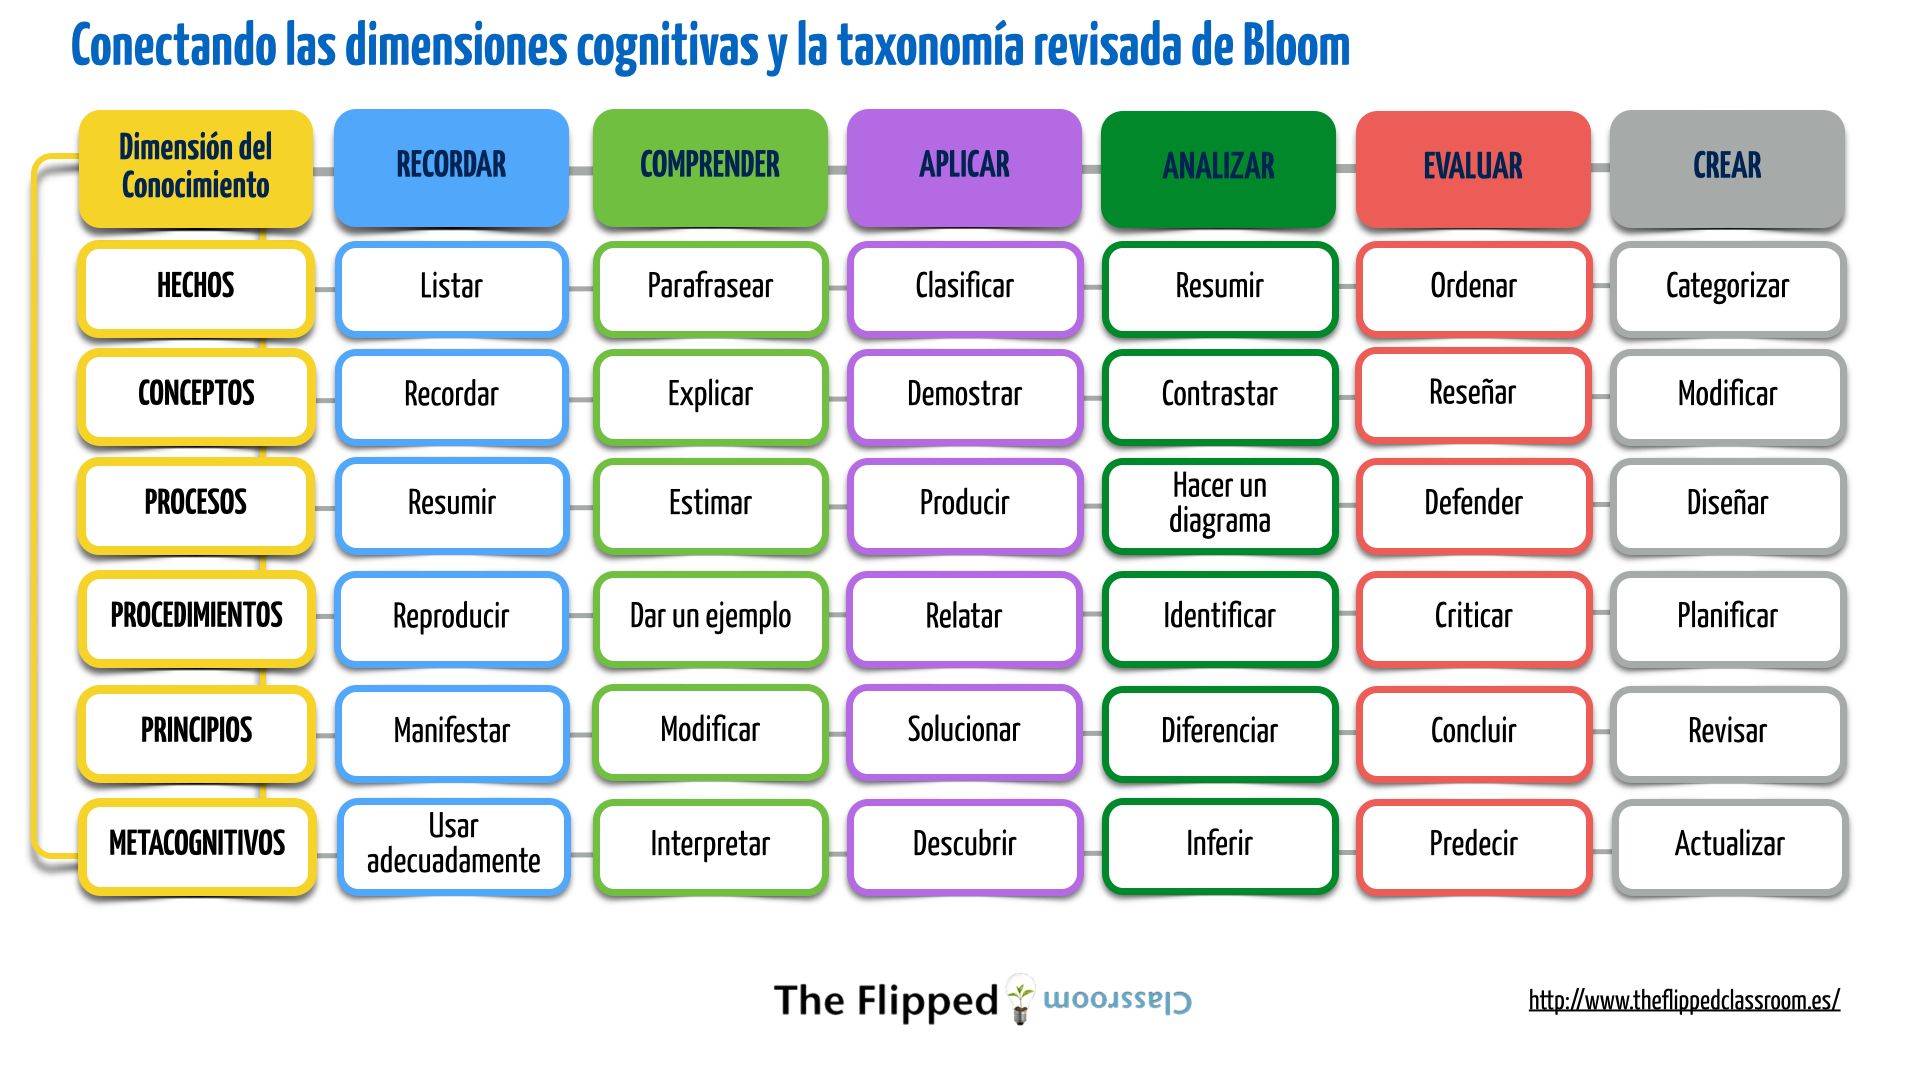 http://www.theflippedclassroom.es/wp-content/uploads/2014/10/bloom-revised.001.jpg